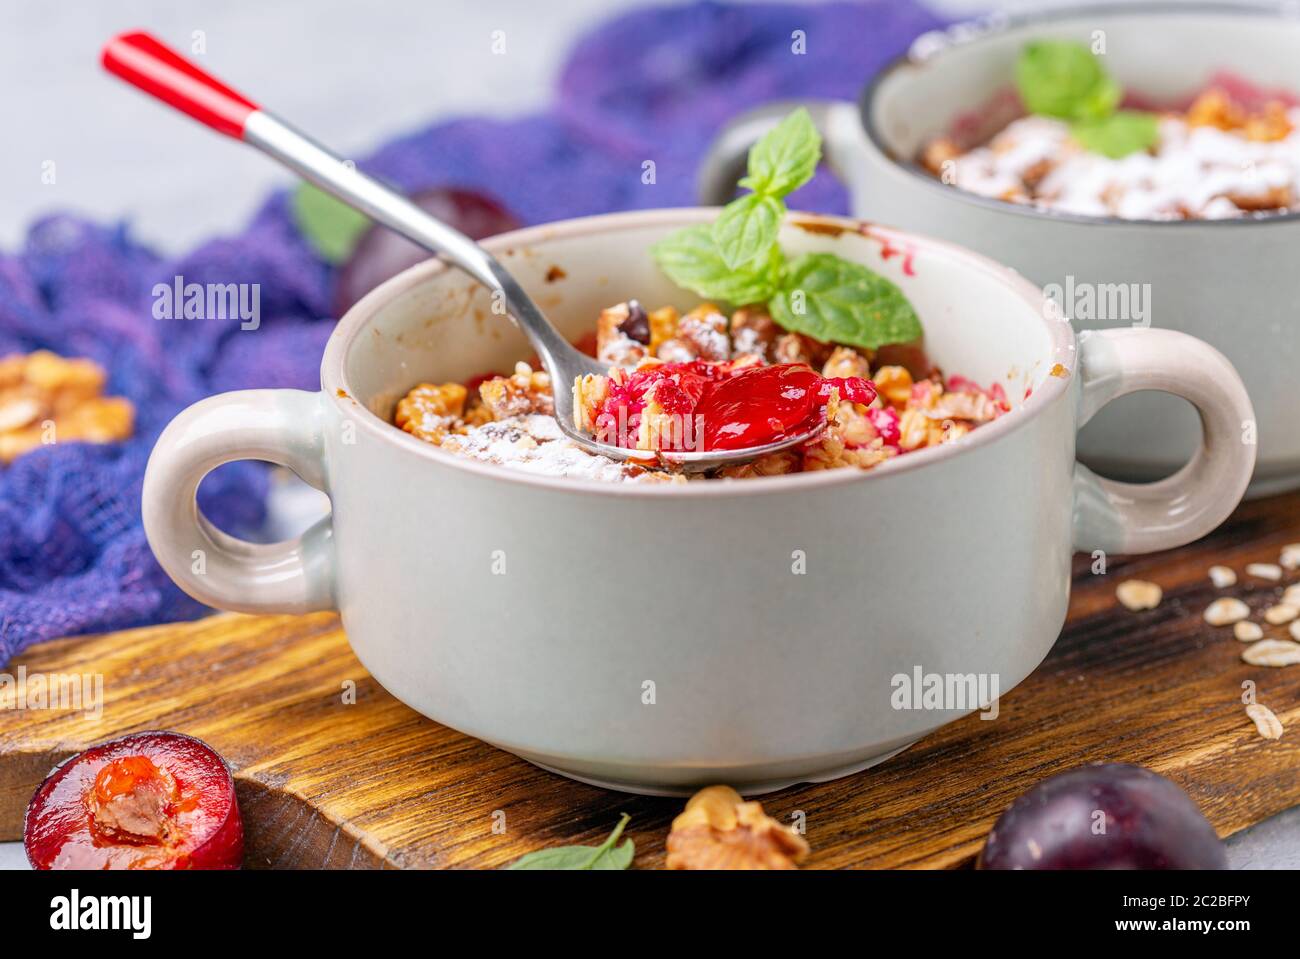 Red cherry plum crumble for breakfast. Stock Photo